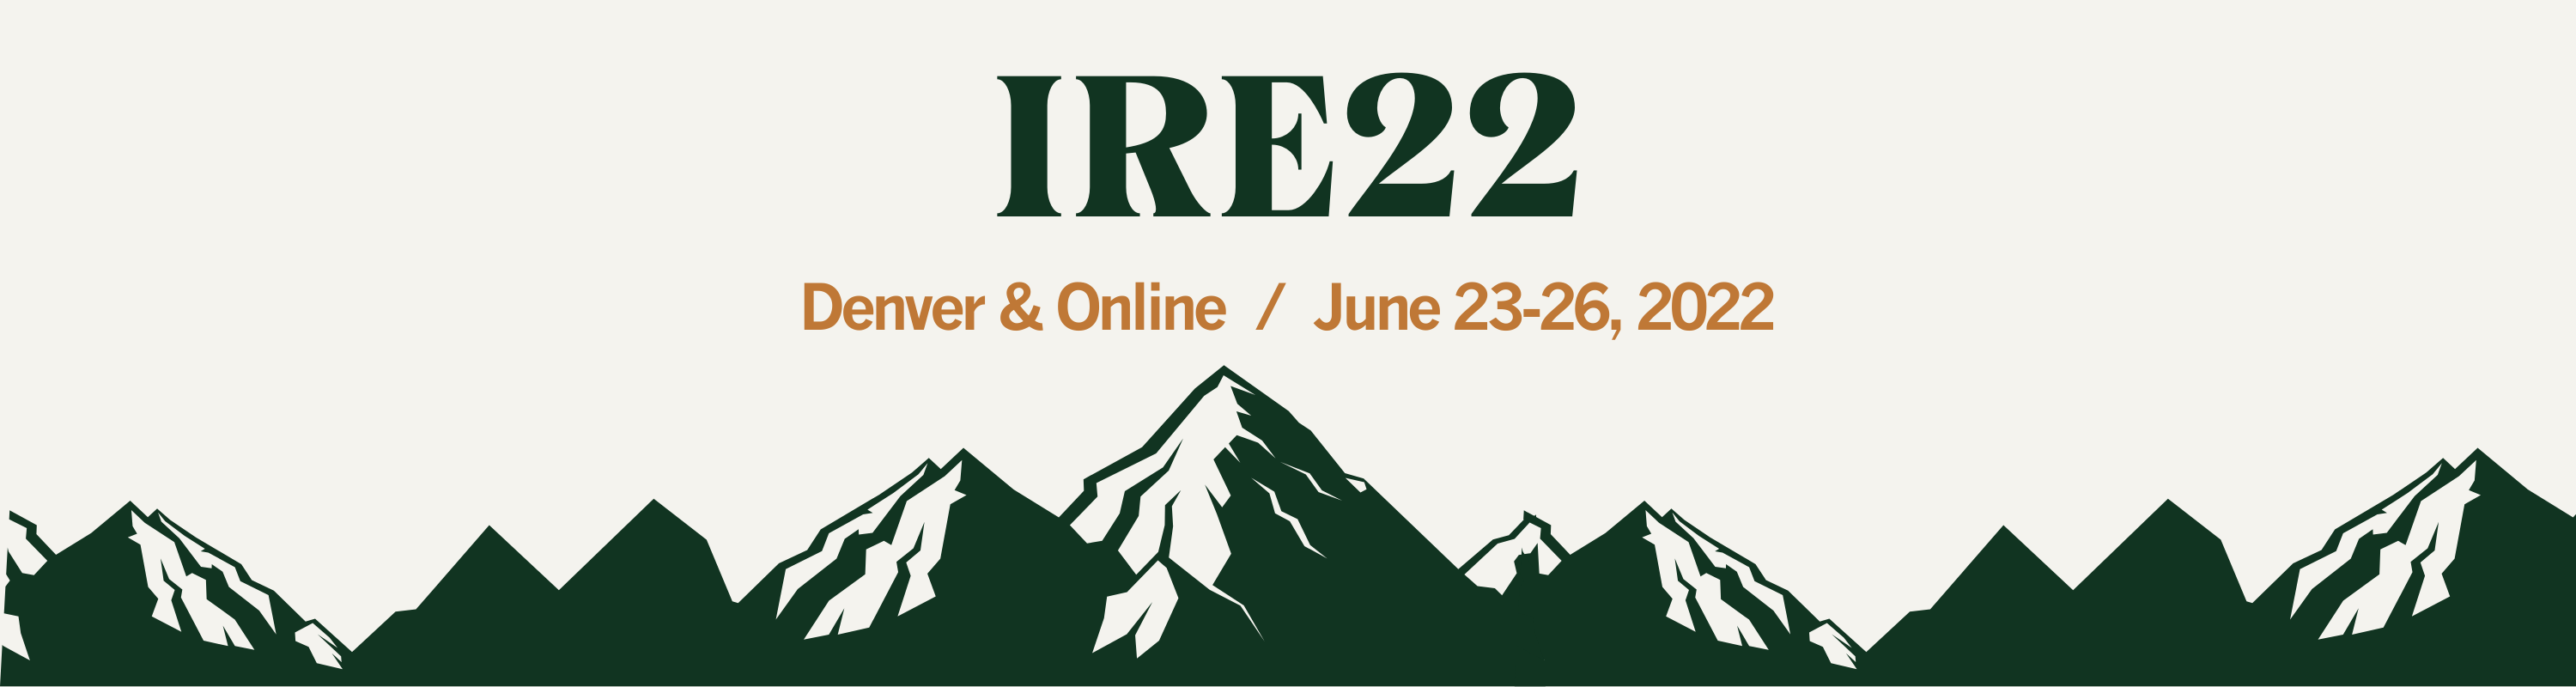 IRE22 conference logo